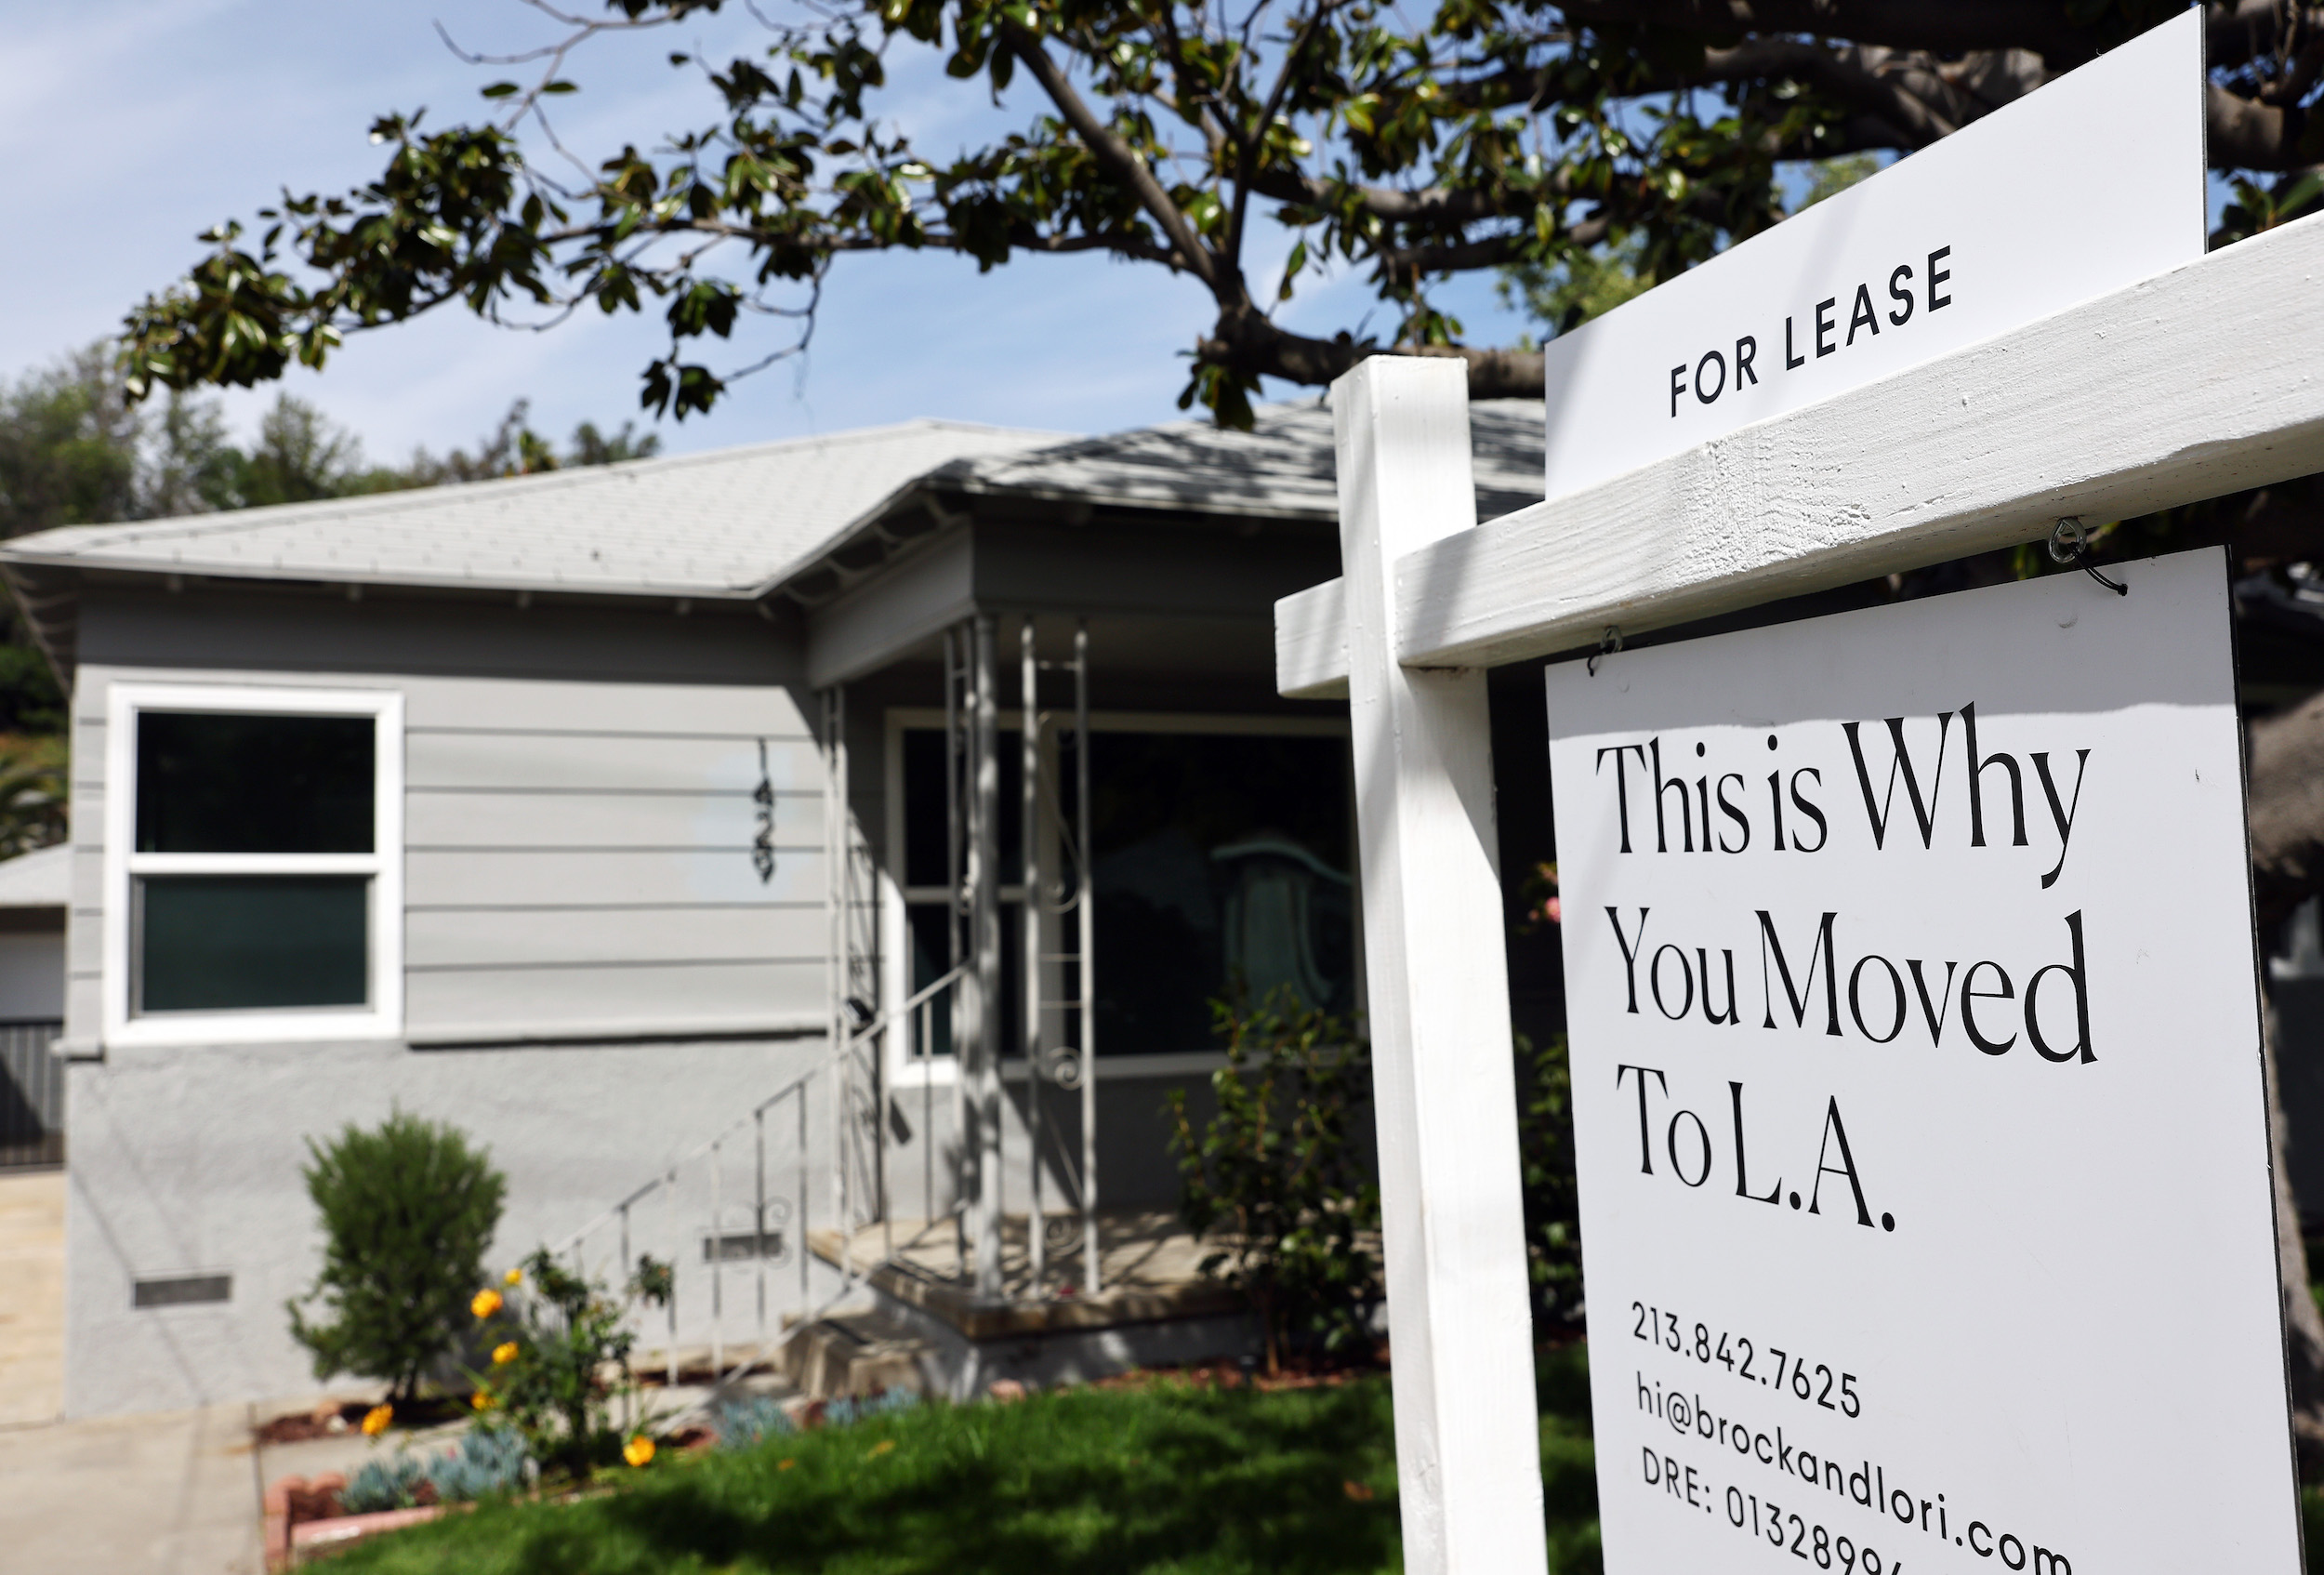 New American Housing Landscape: From Renting Longer to Co-Purchasing Homes